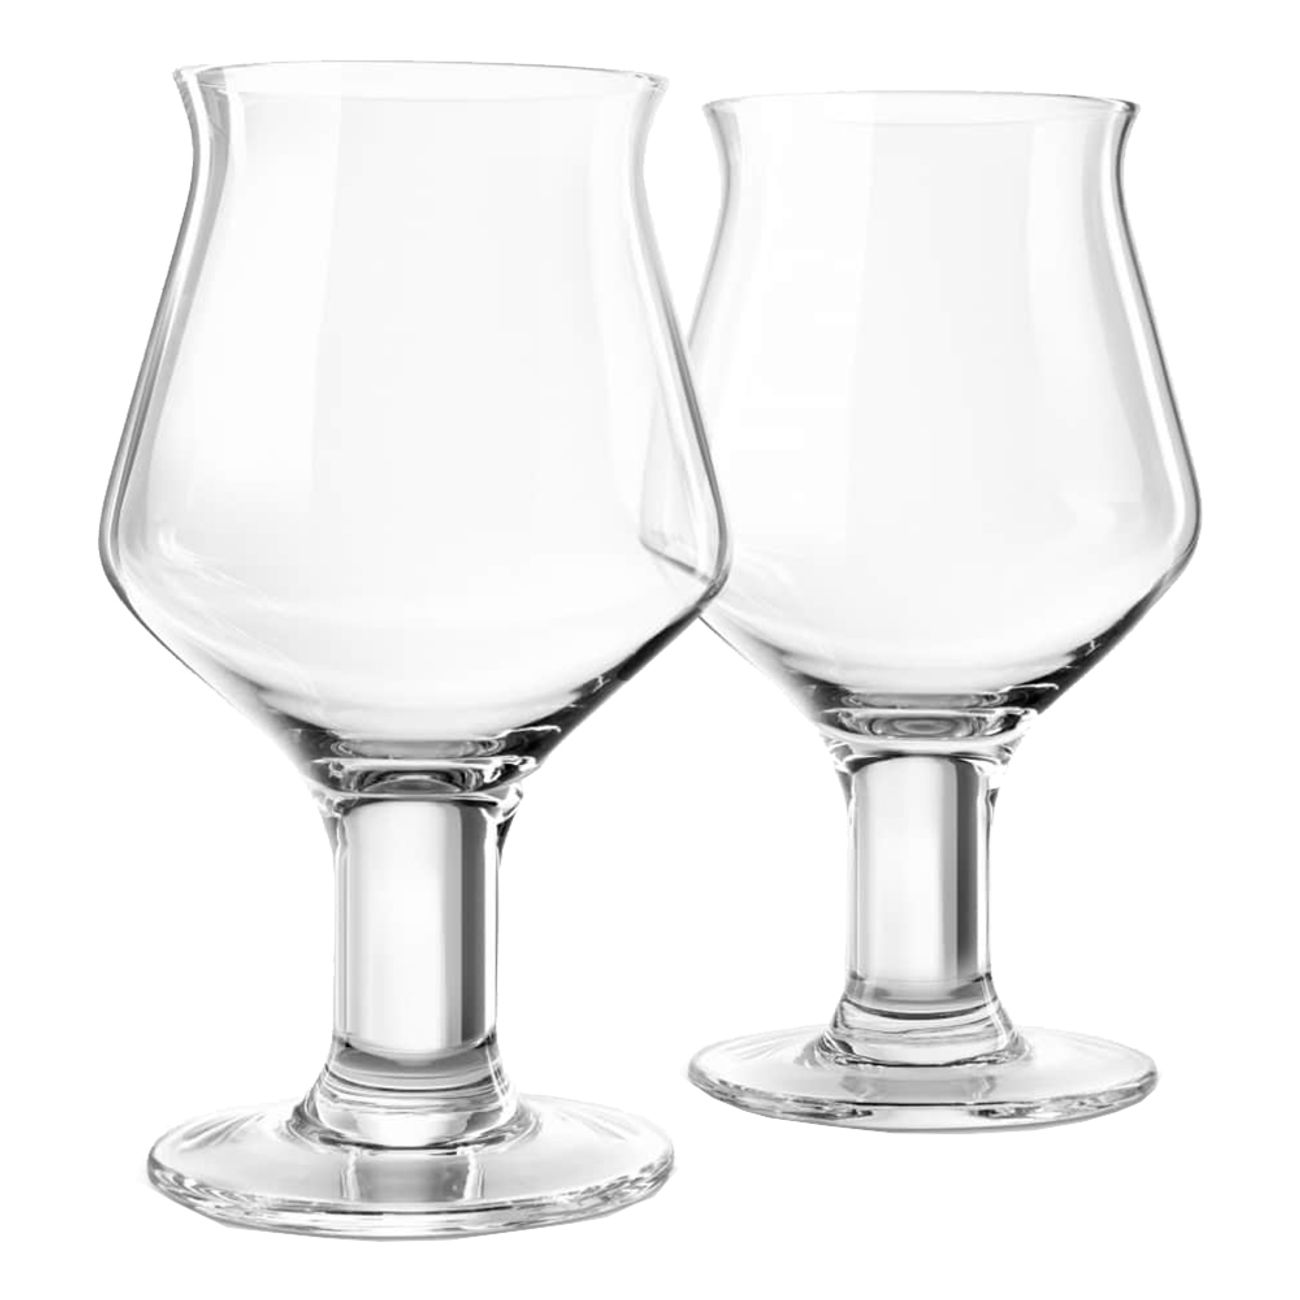 final-touch-craft-beer-glasses-80505-1